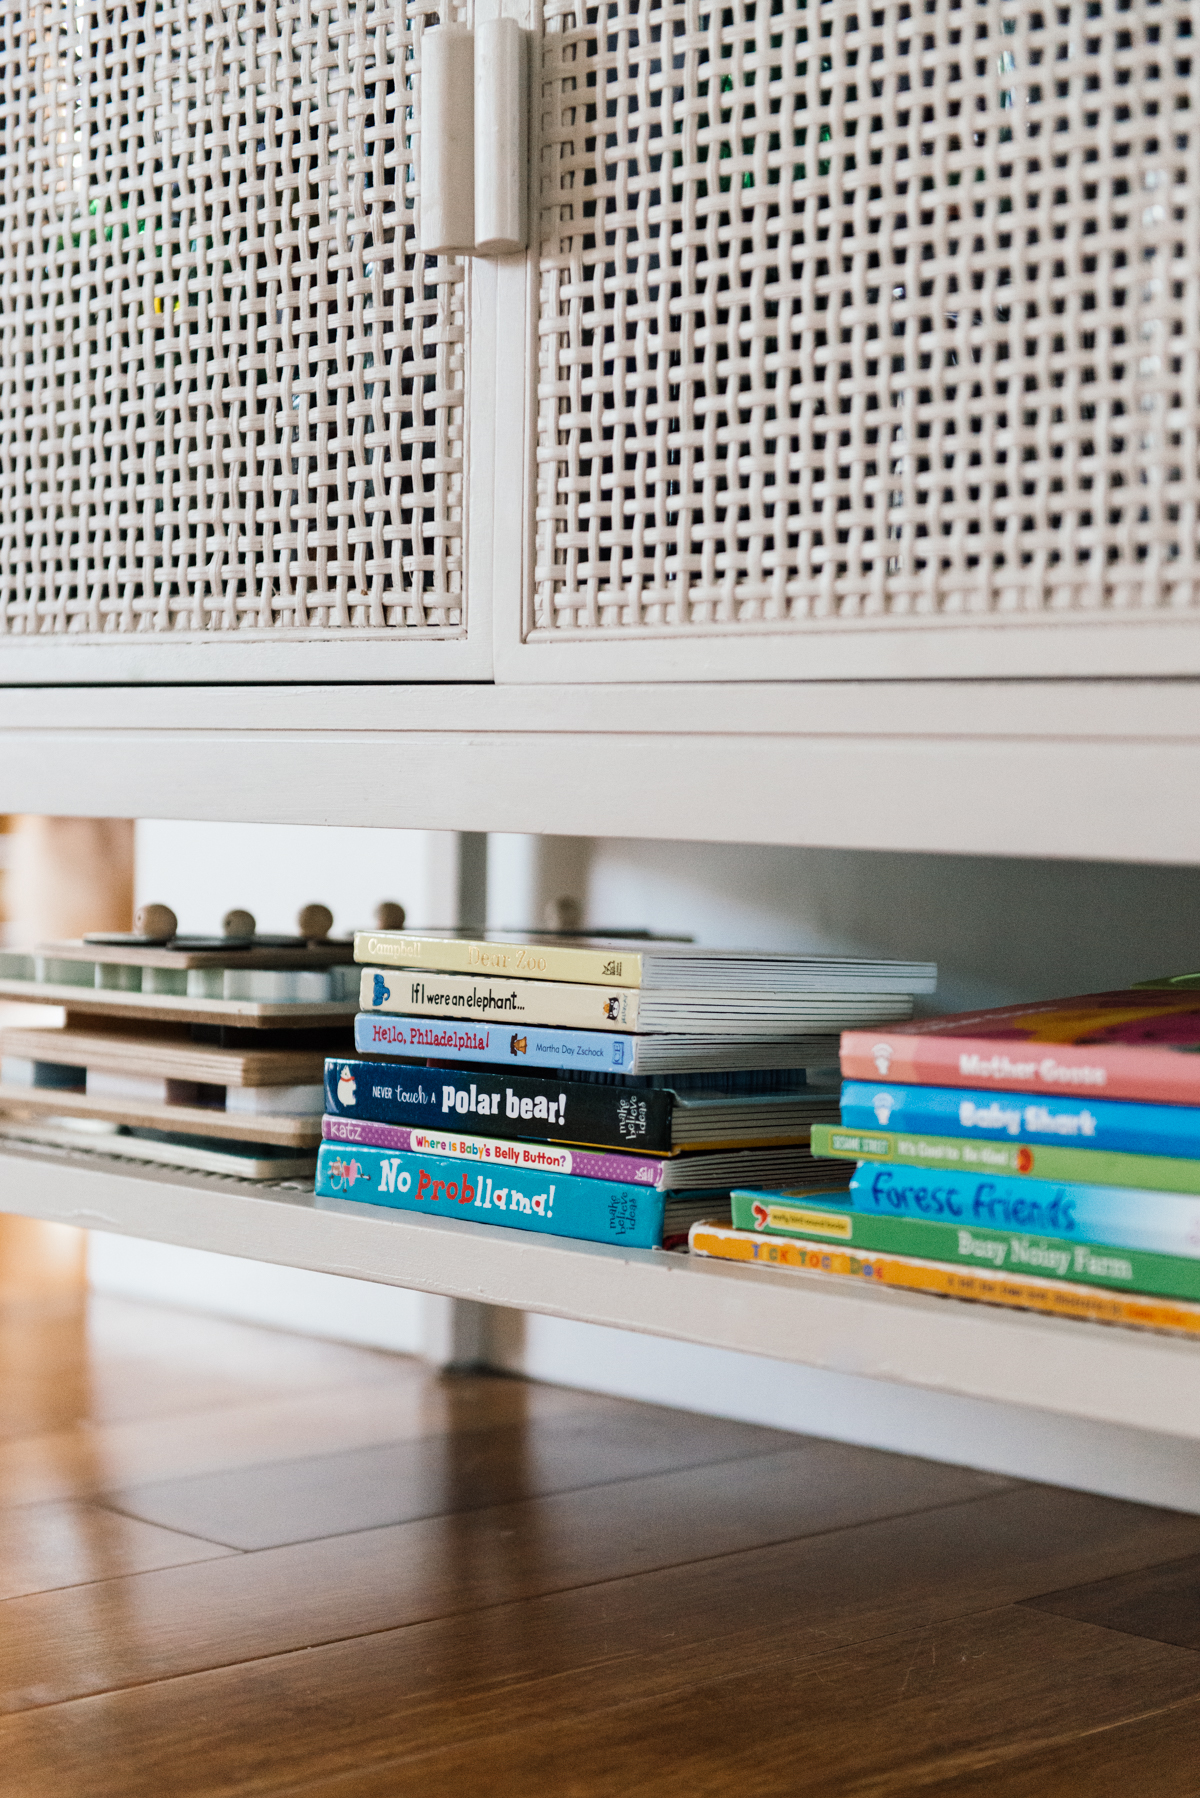 Tricks to hide your toddlers toys and books on shelves by Kimberly Lapides of eatsleepwear